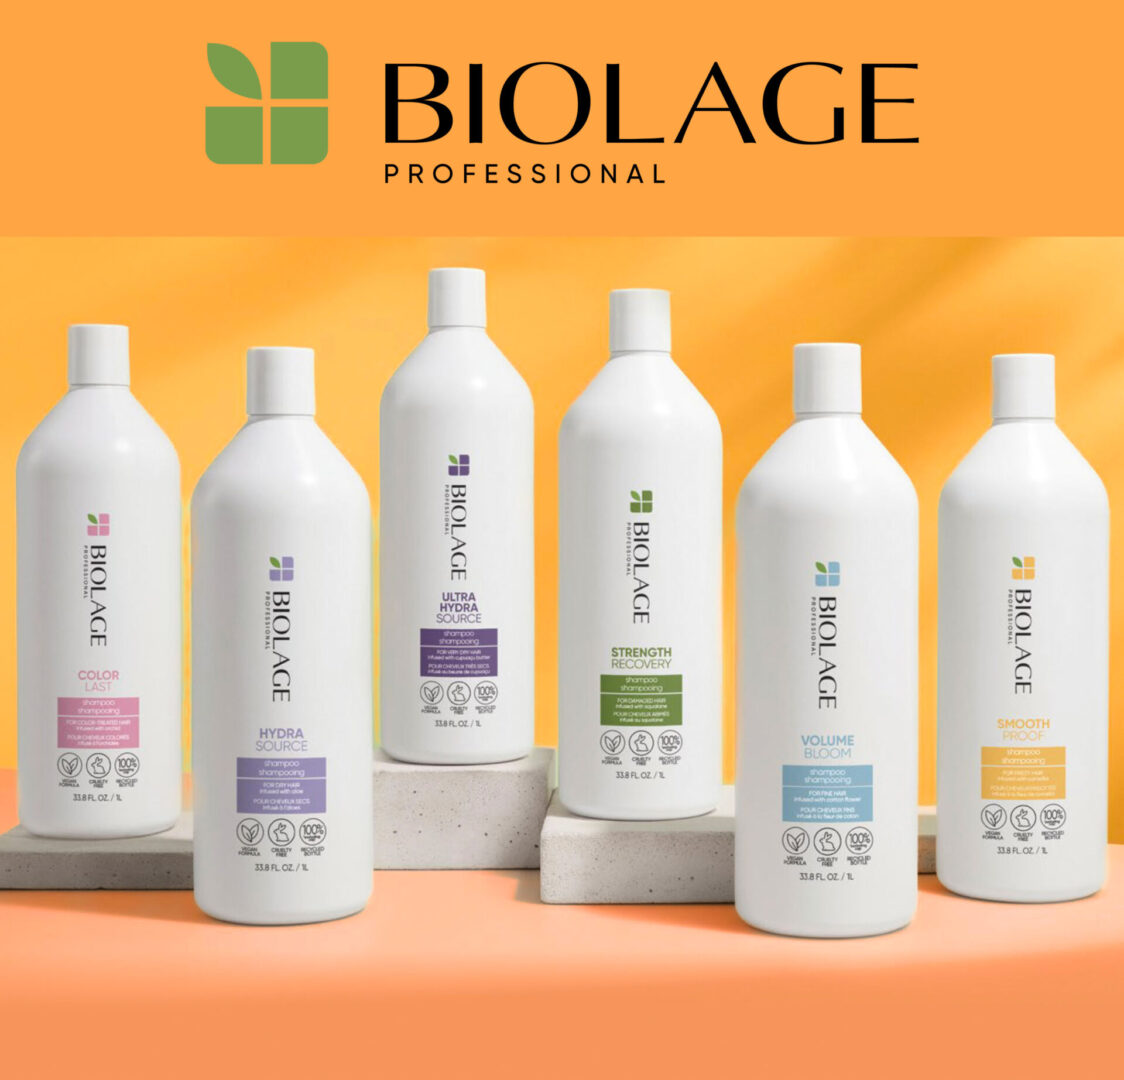 Bioloage Professional Products